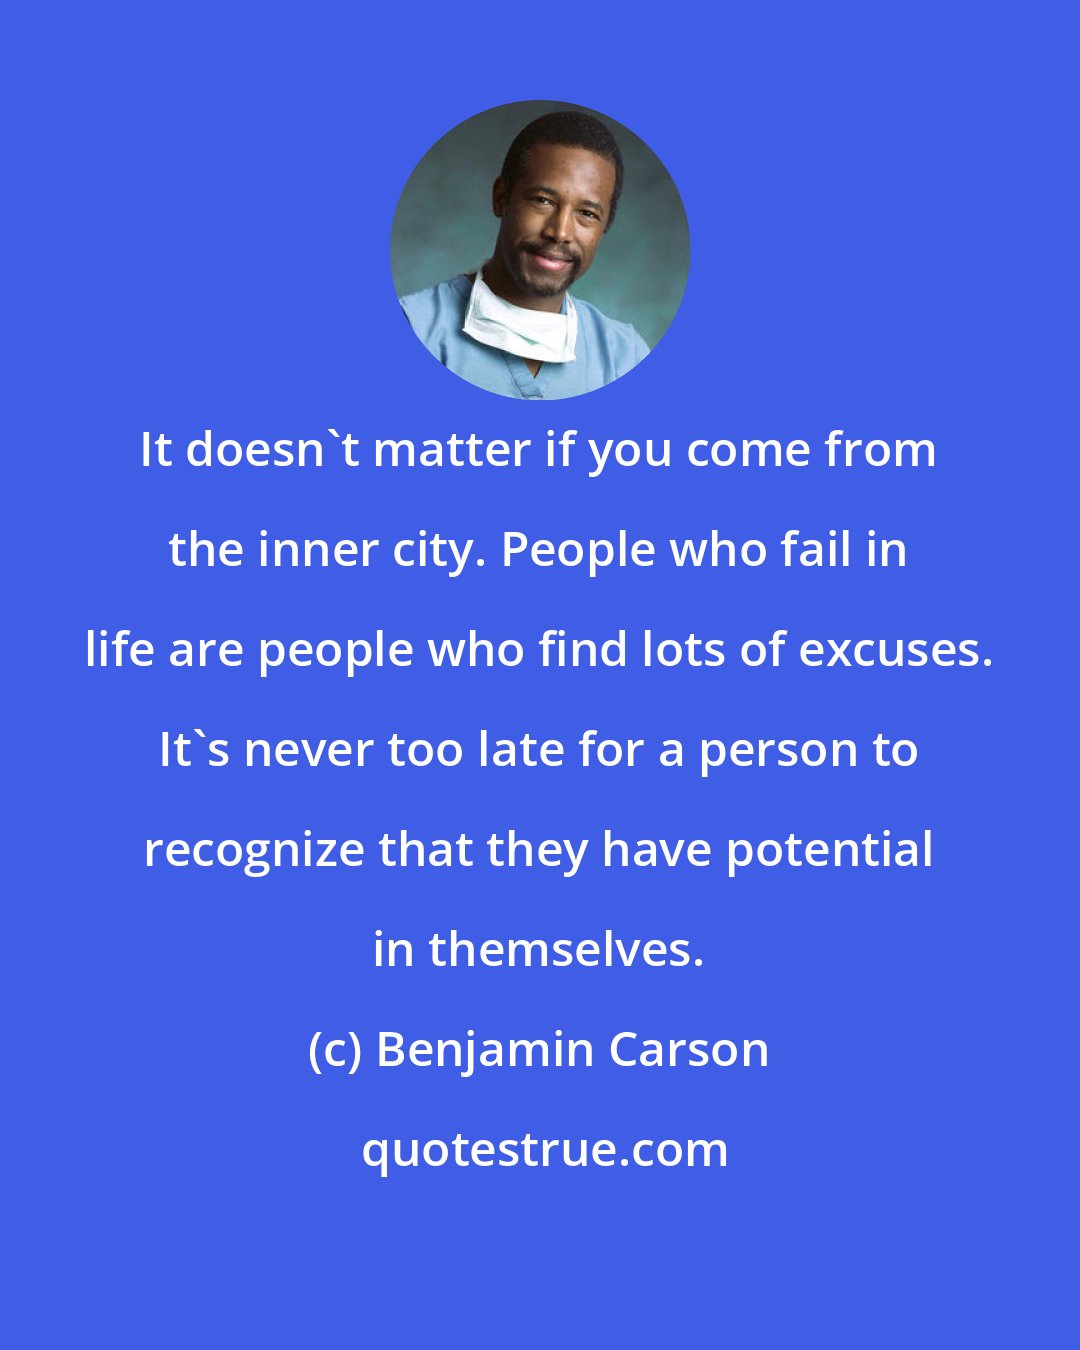 Benjamin Carson: It doesn't matter if you come from the inner city. People who fail in life are people who find lots of excuses. It's never too late for a person to recognize that they have potential in themselves.